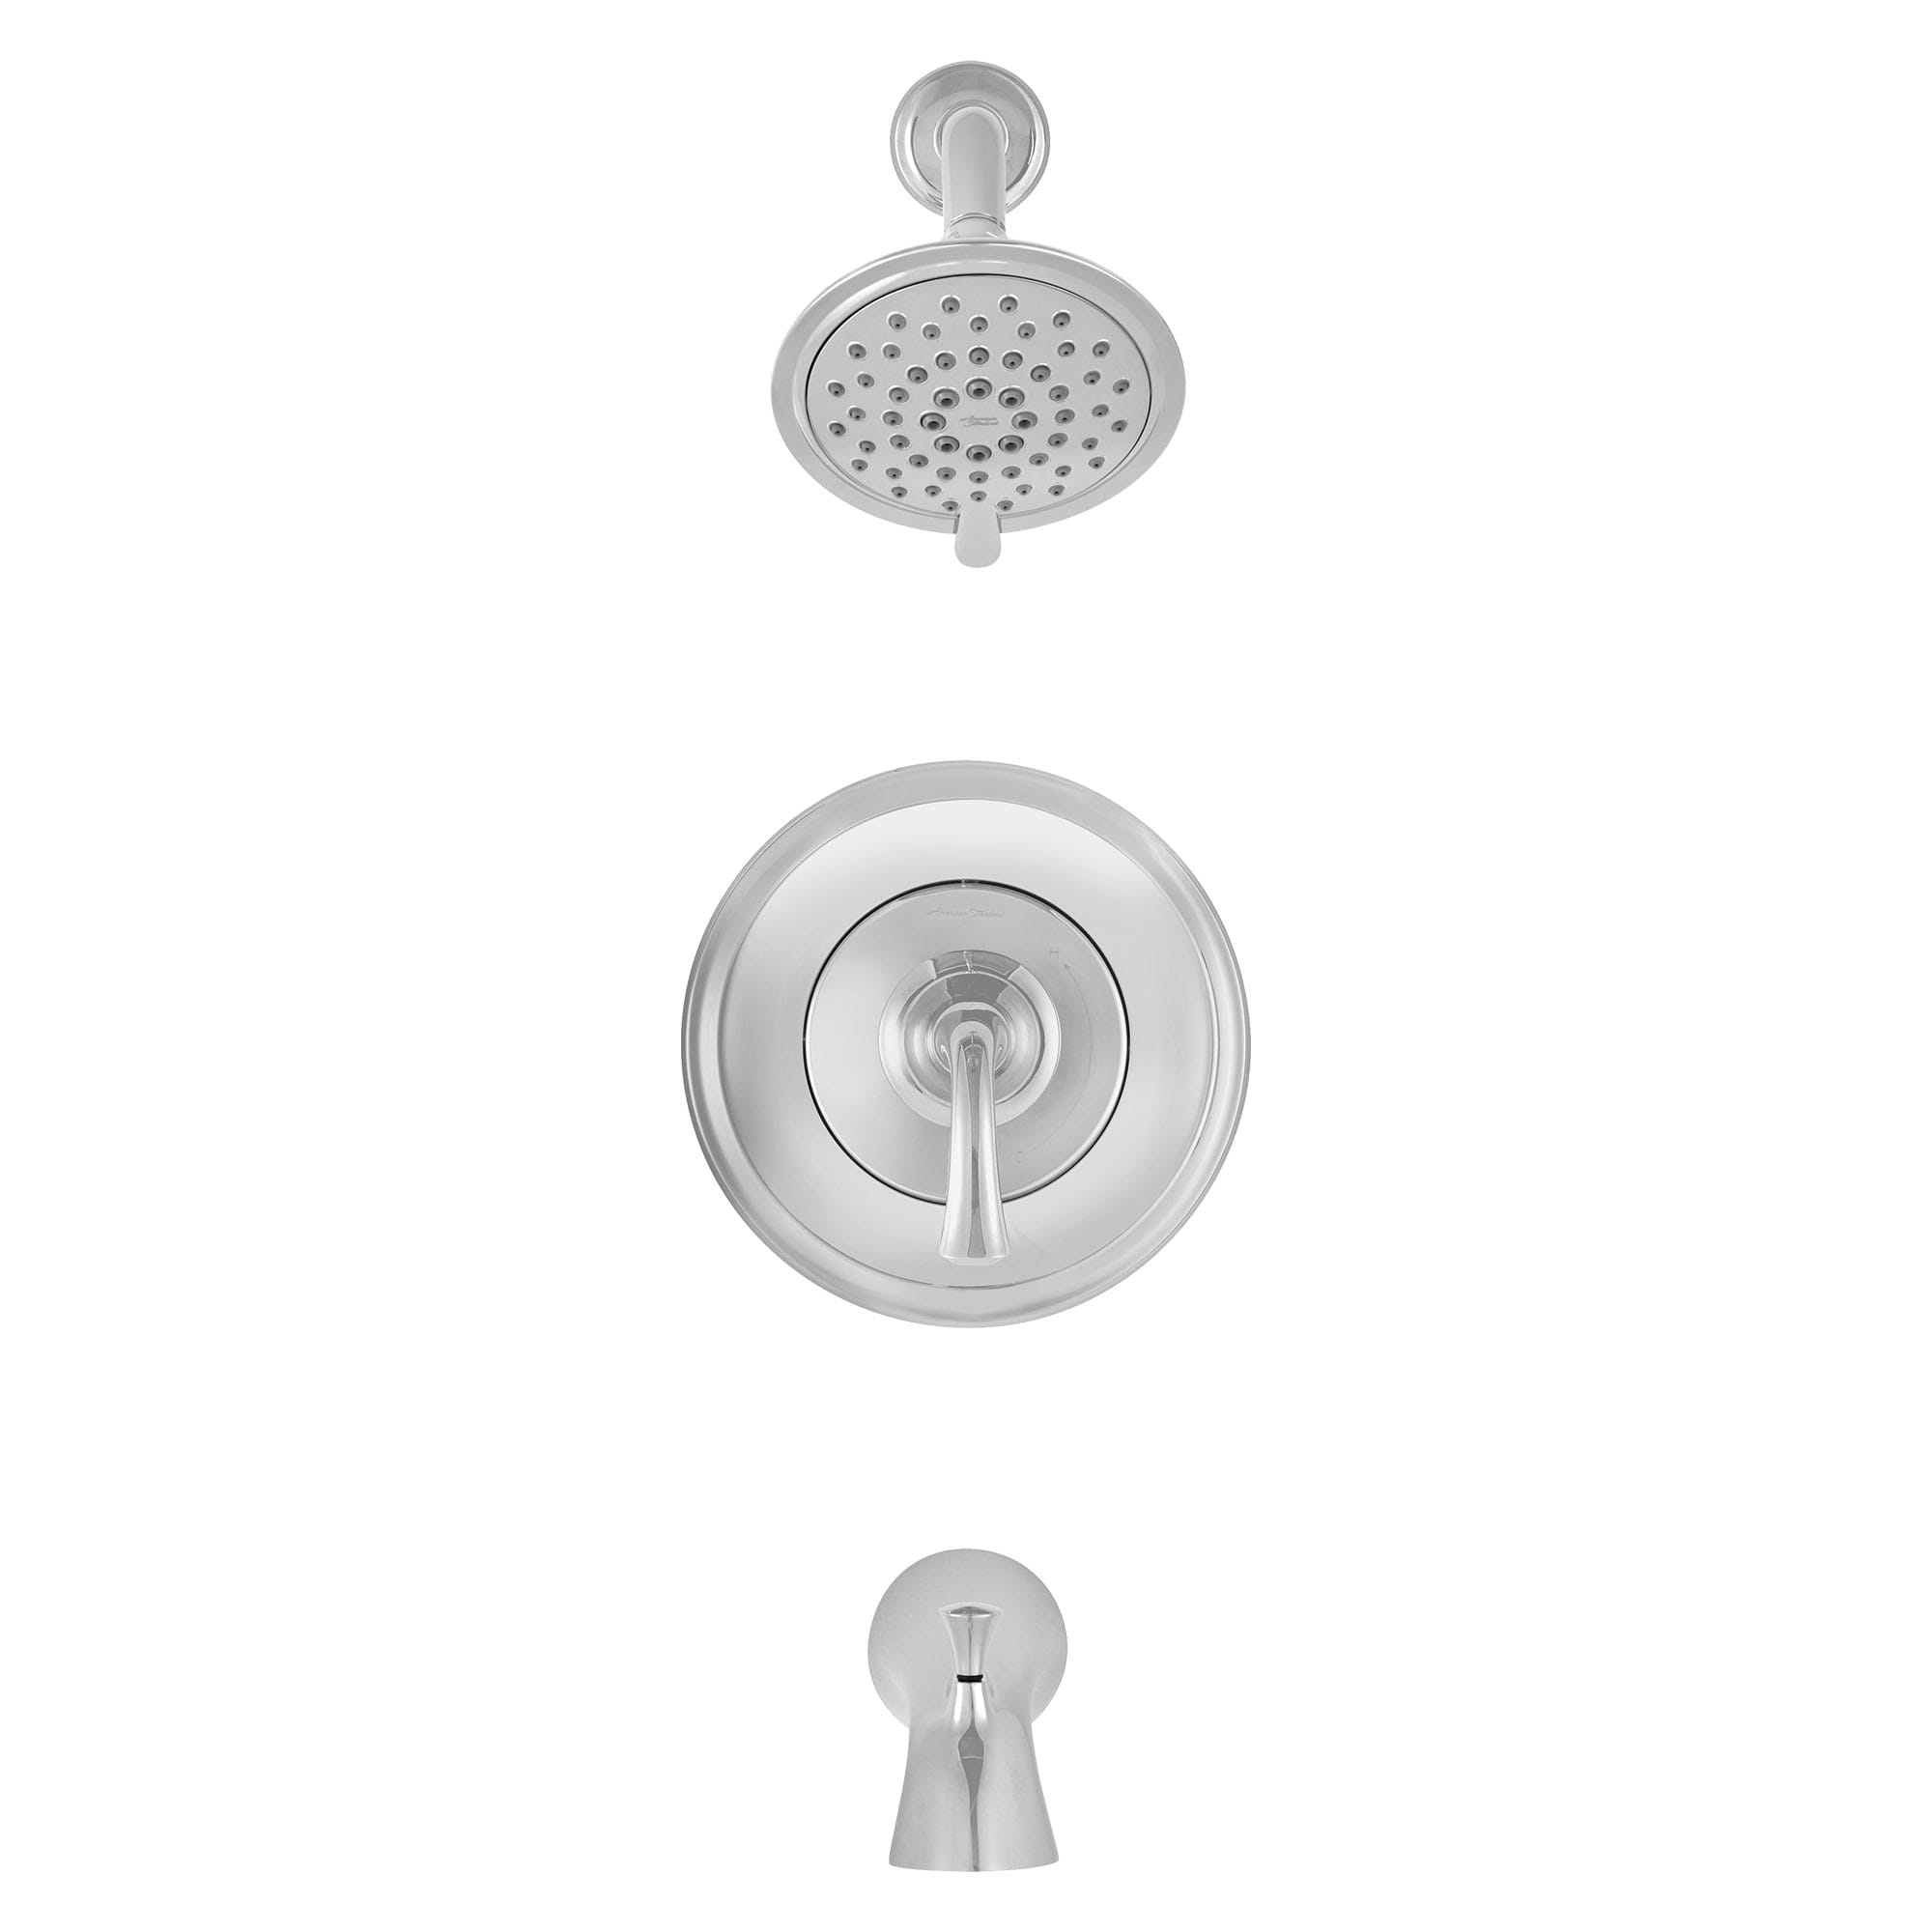 Patience 25 gpm 95 L min Tub and Shower Trim Kit With 3 Function Showerhead Double Ceramic Pressure Balance Cartridge With Lever Handle CHROME